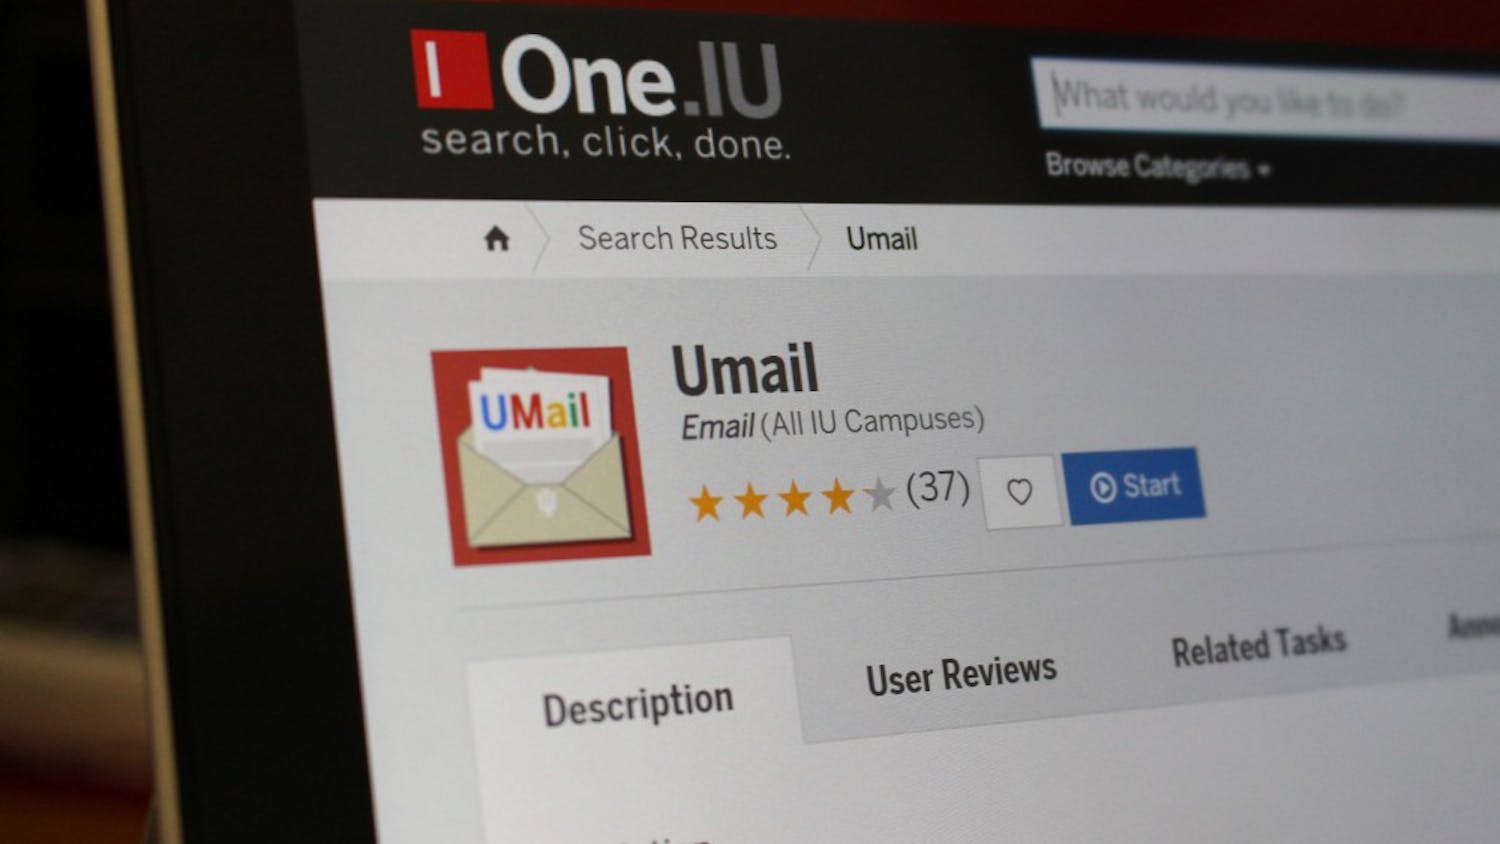 Starting March 19, students will no longer have access to their email accounts via Umail. Several steps can be taken to ensure they continue receiving their emails.